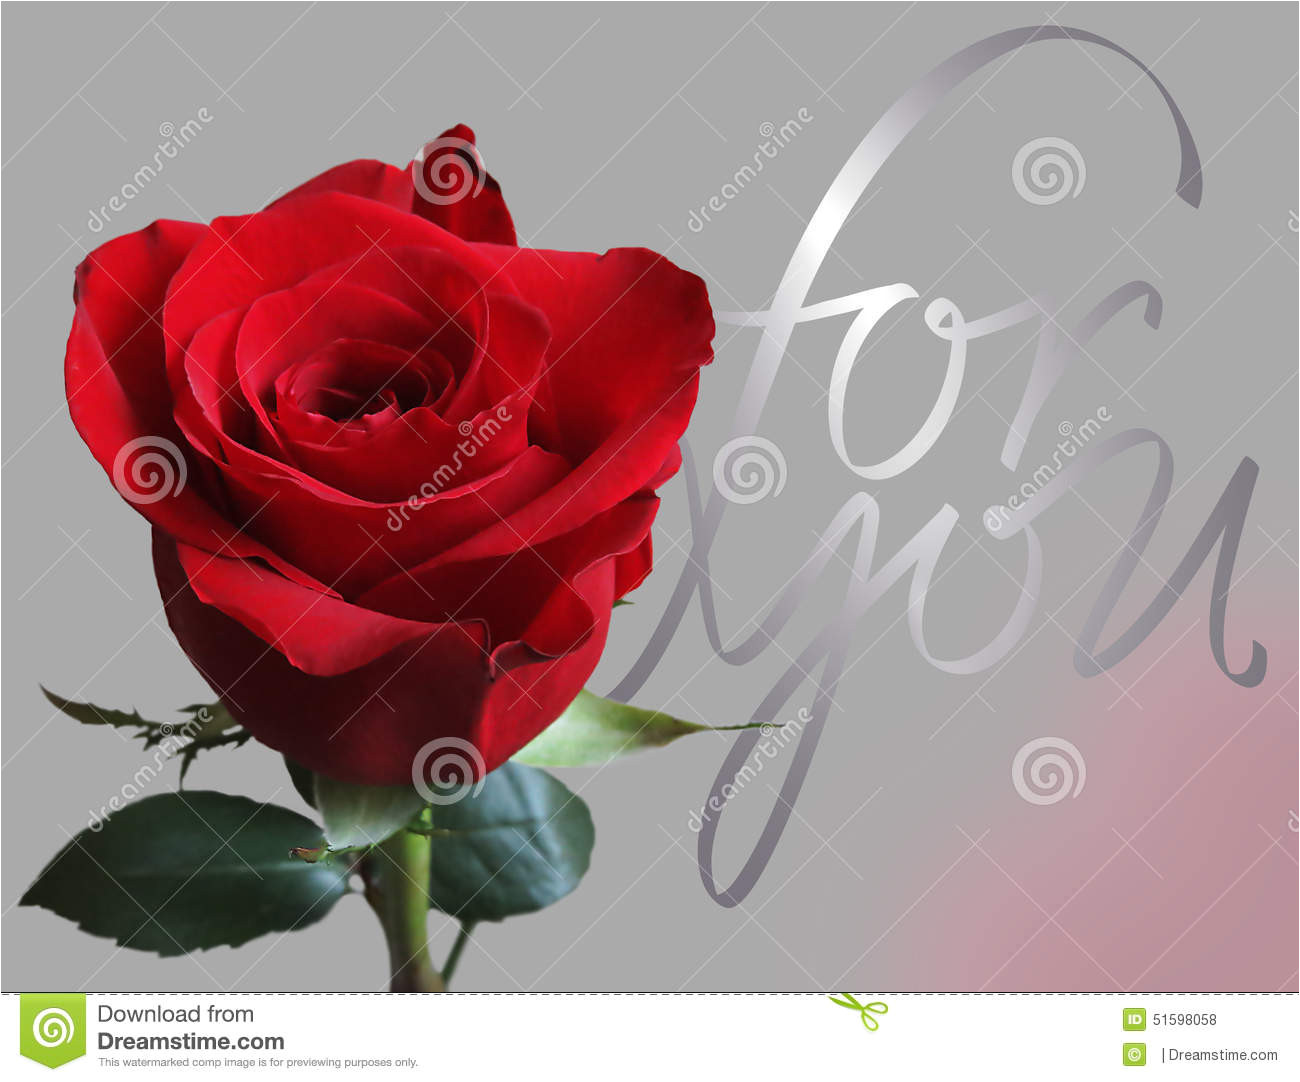 greeting card rose any kind events like valentine s mother s father s women s day name days birthdays 51598058 jpg